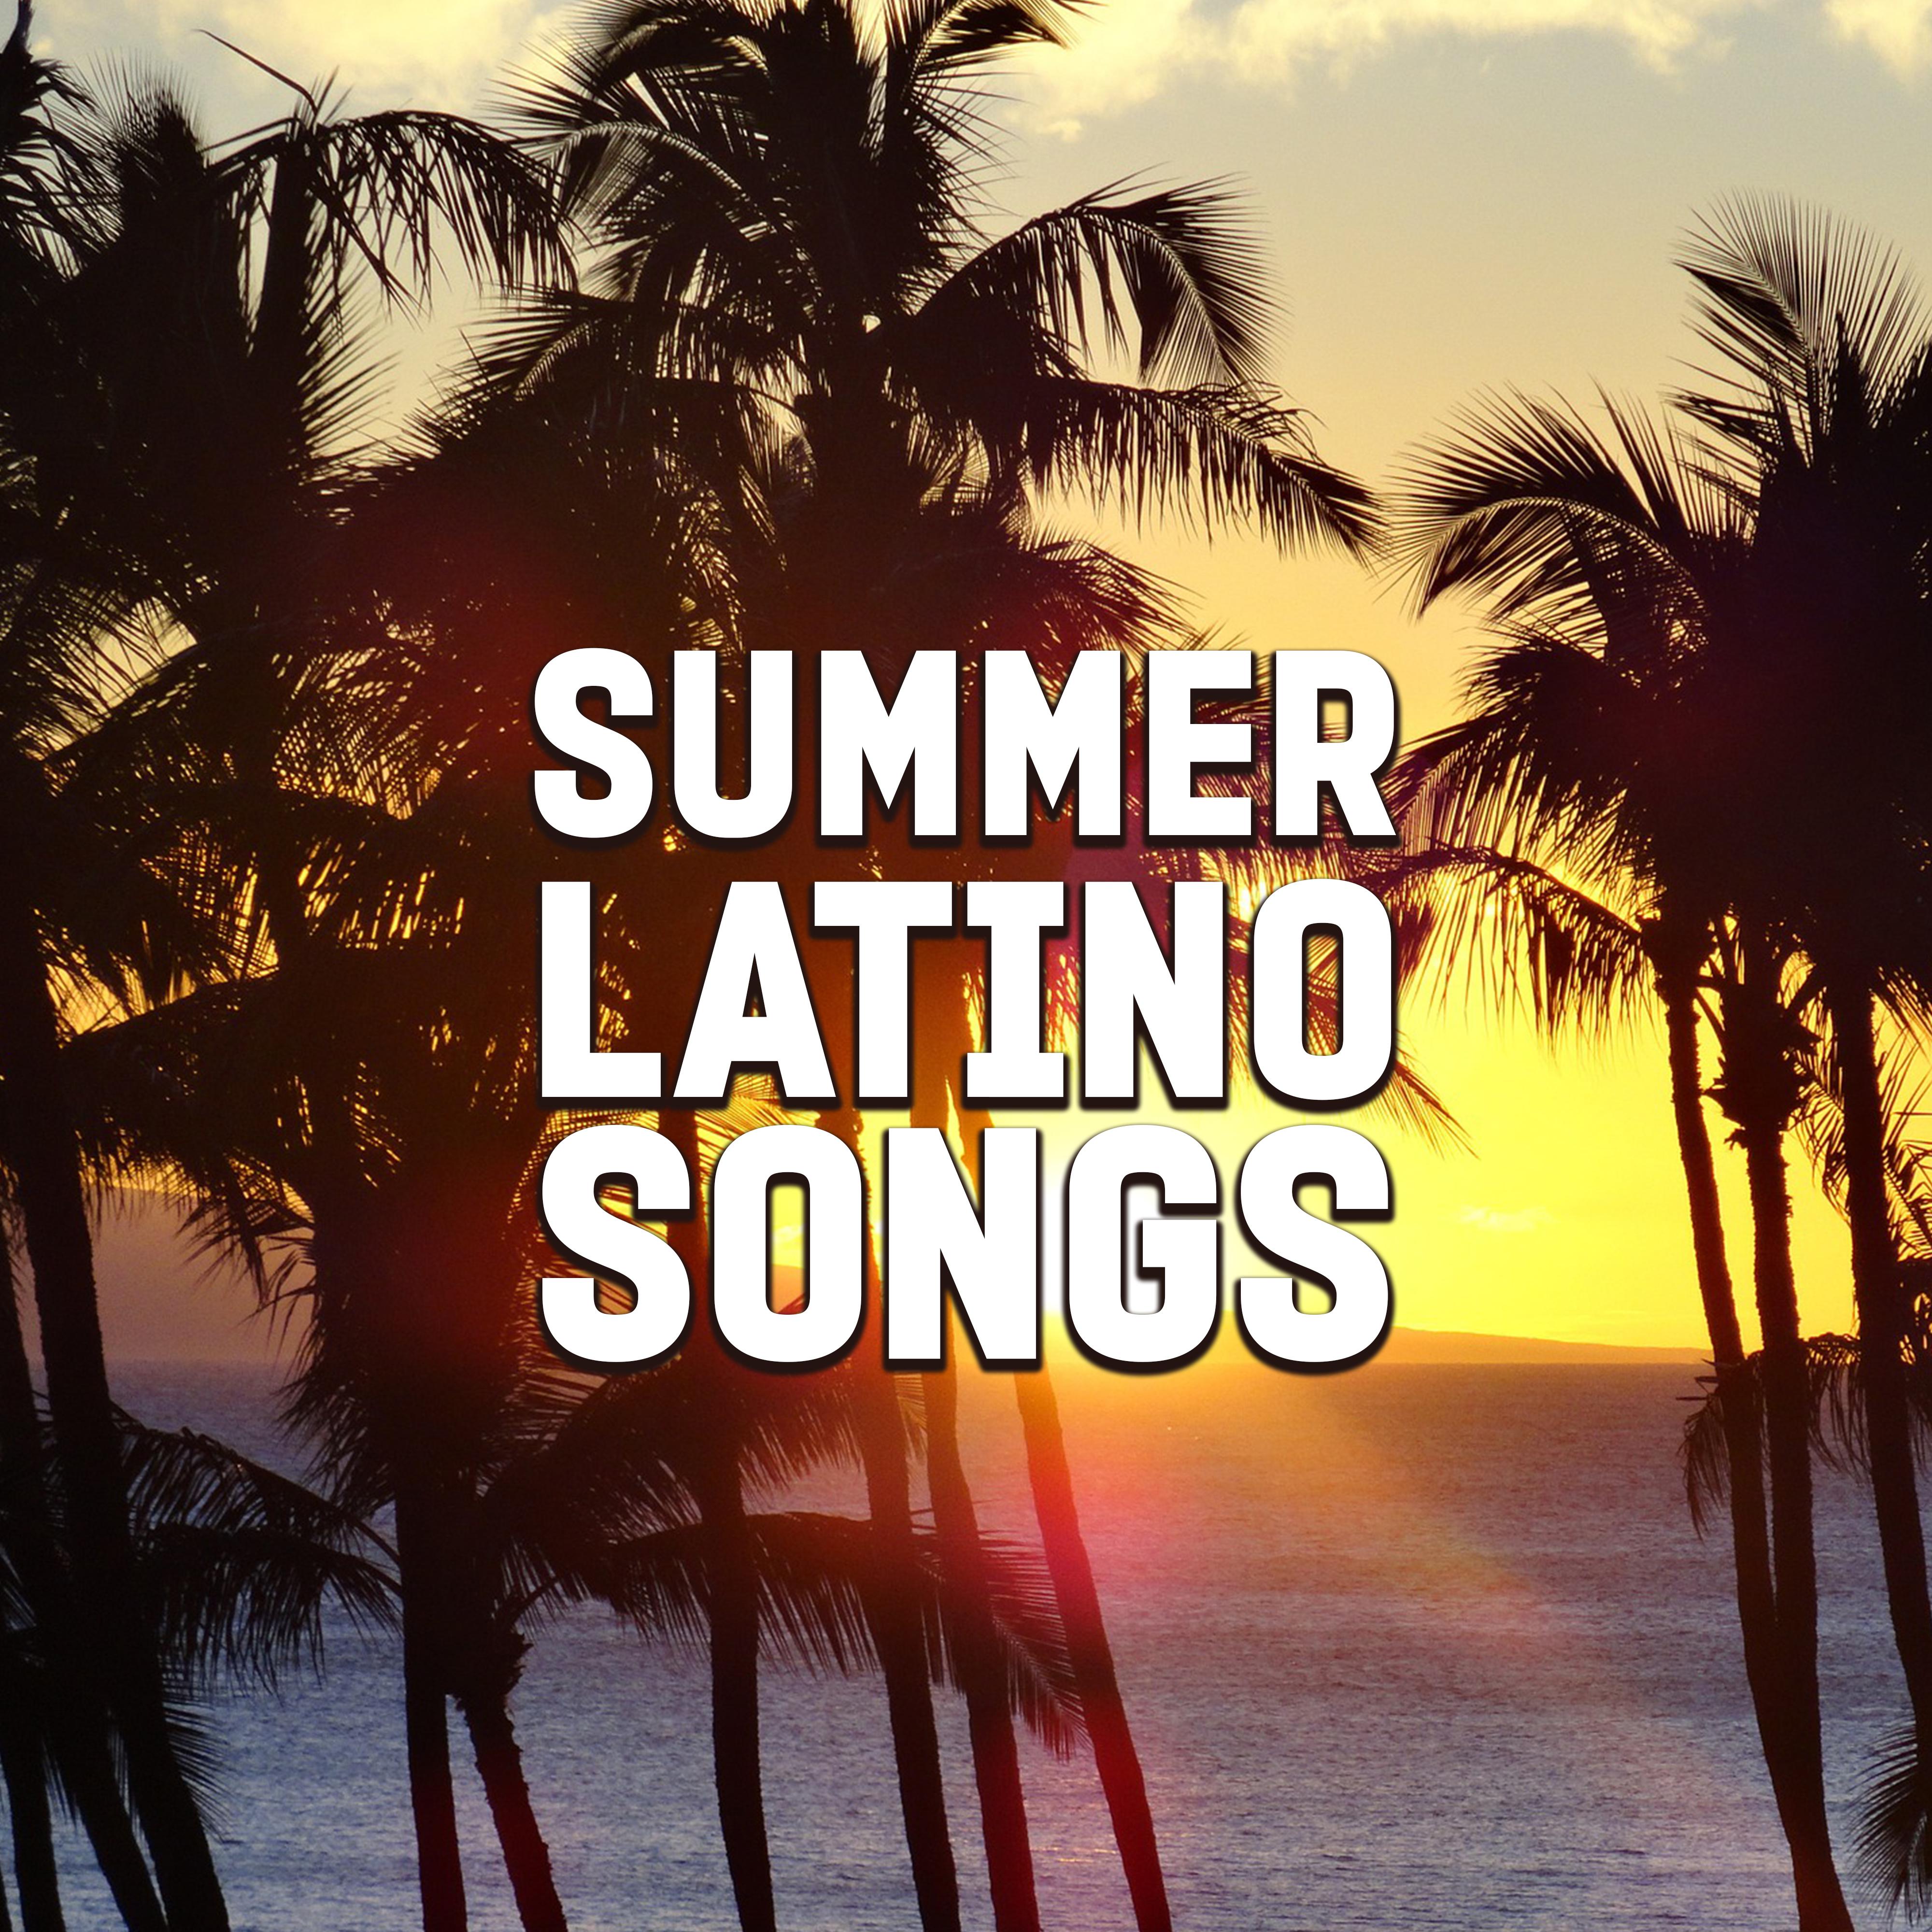 Summer Latino Songs – Best Party Time, Latino Dance, Summer Fun, Holiday 2017